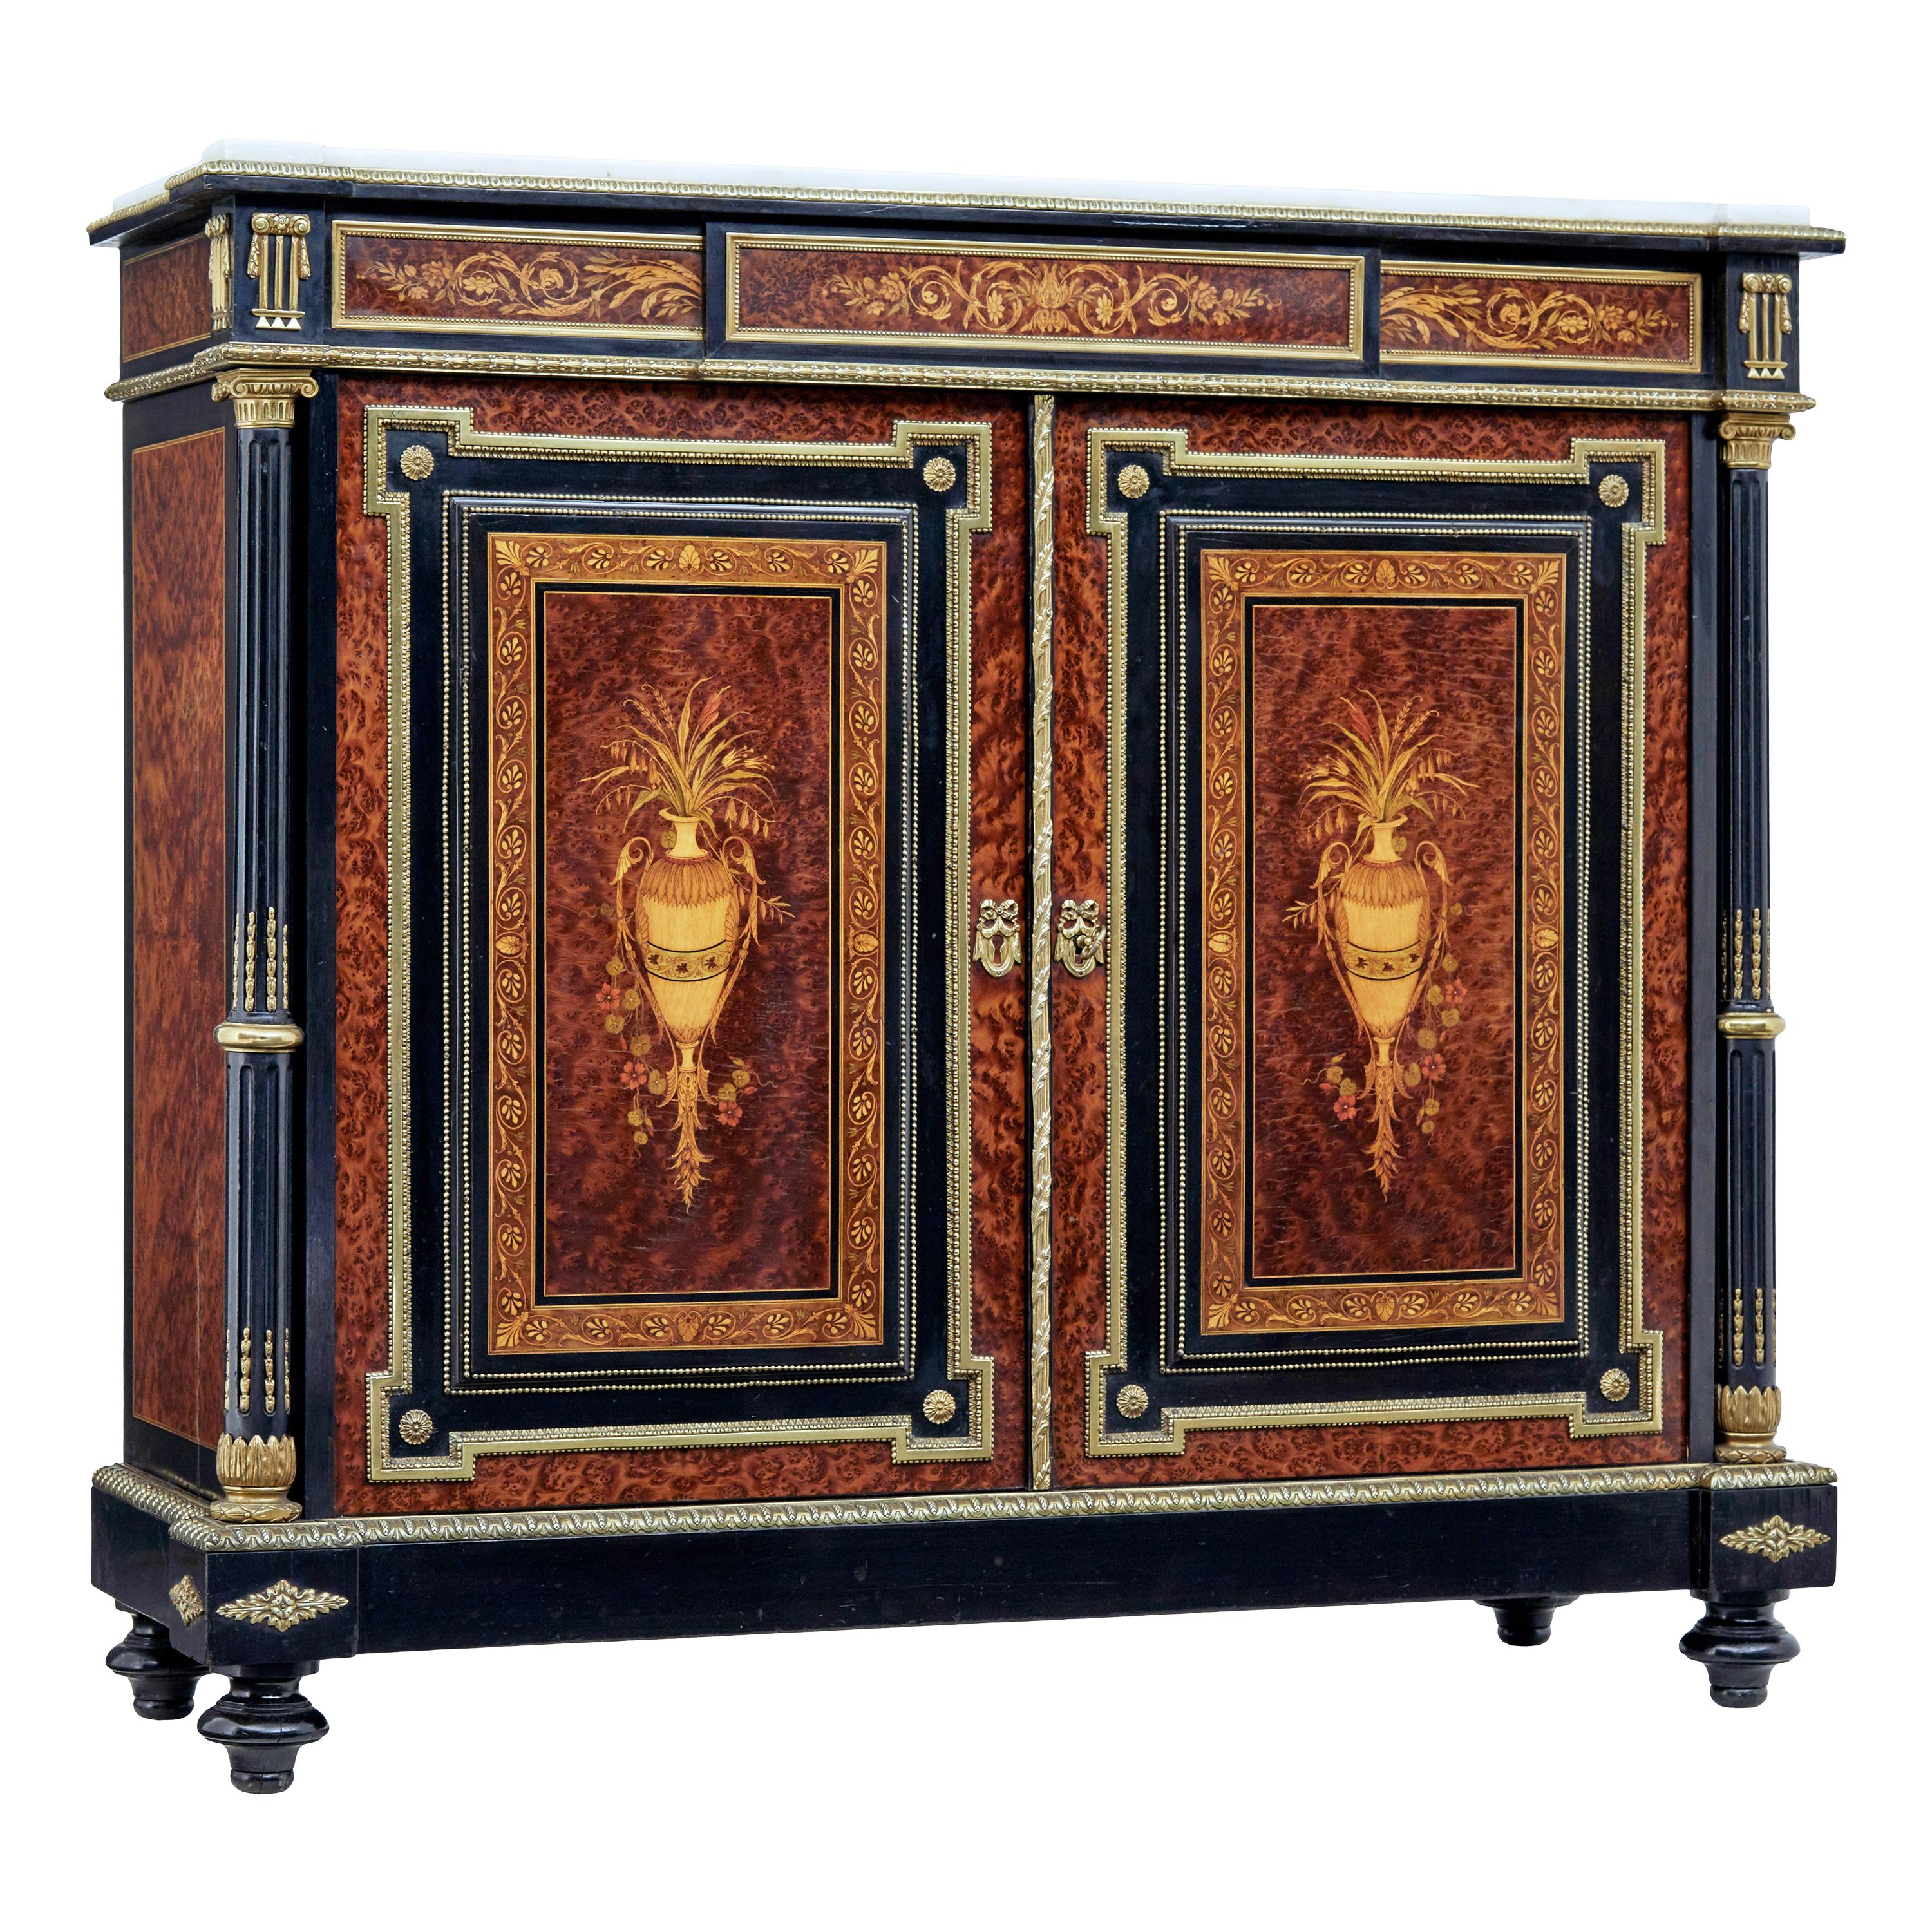 19th Century French Marble Top Inlaid Amboyna Sideboard